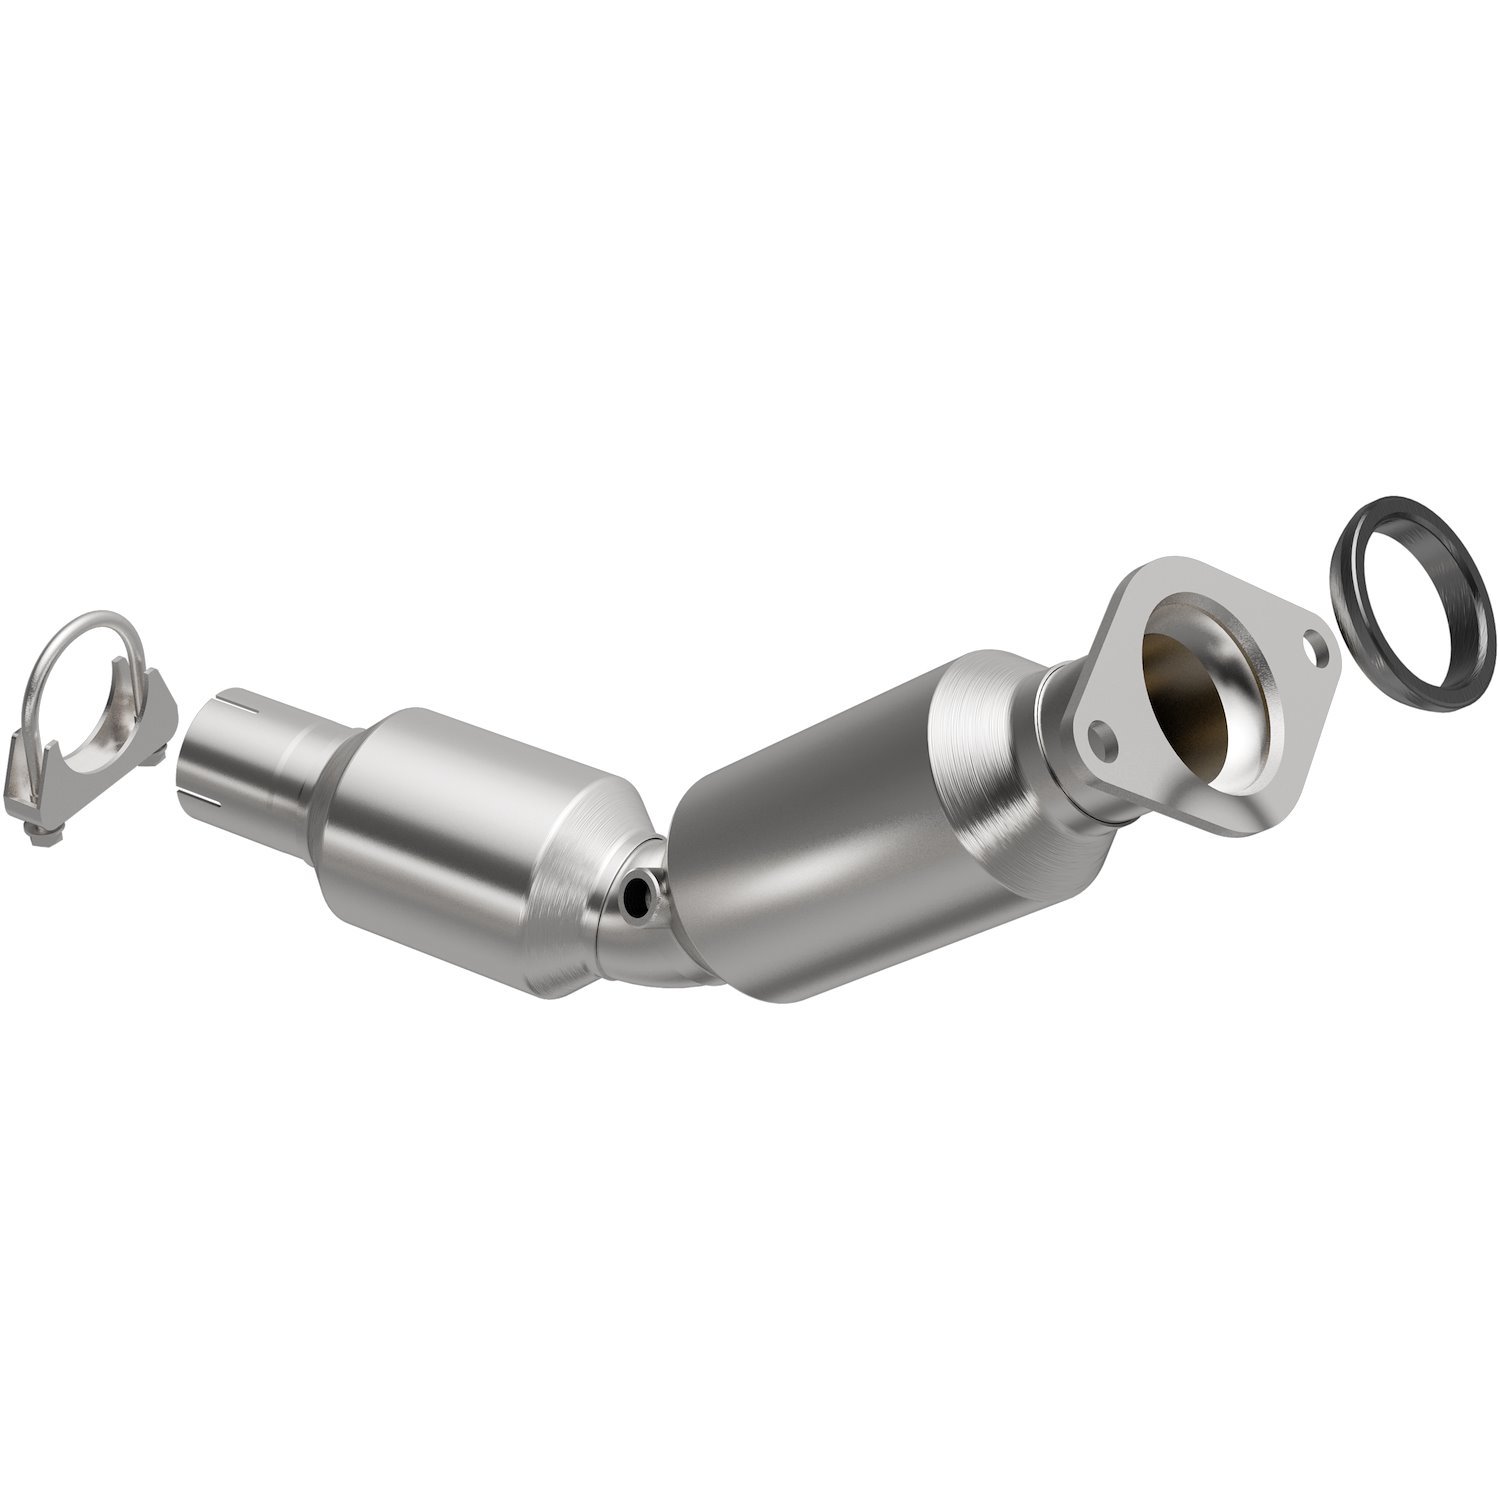 OEM Grade Federal / EPA Compliant Direct-Fit Catalytic Converter 52455